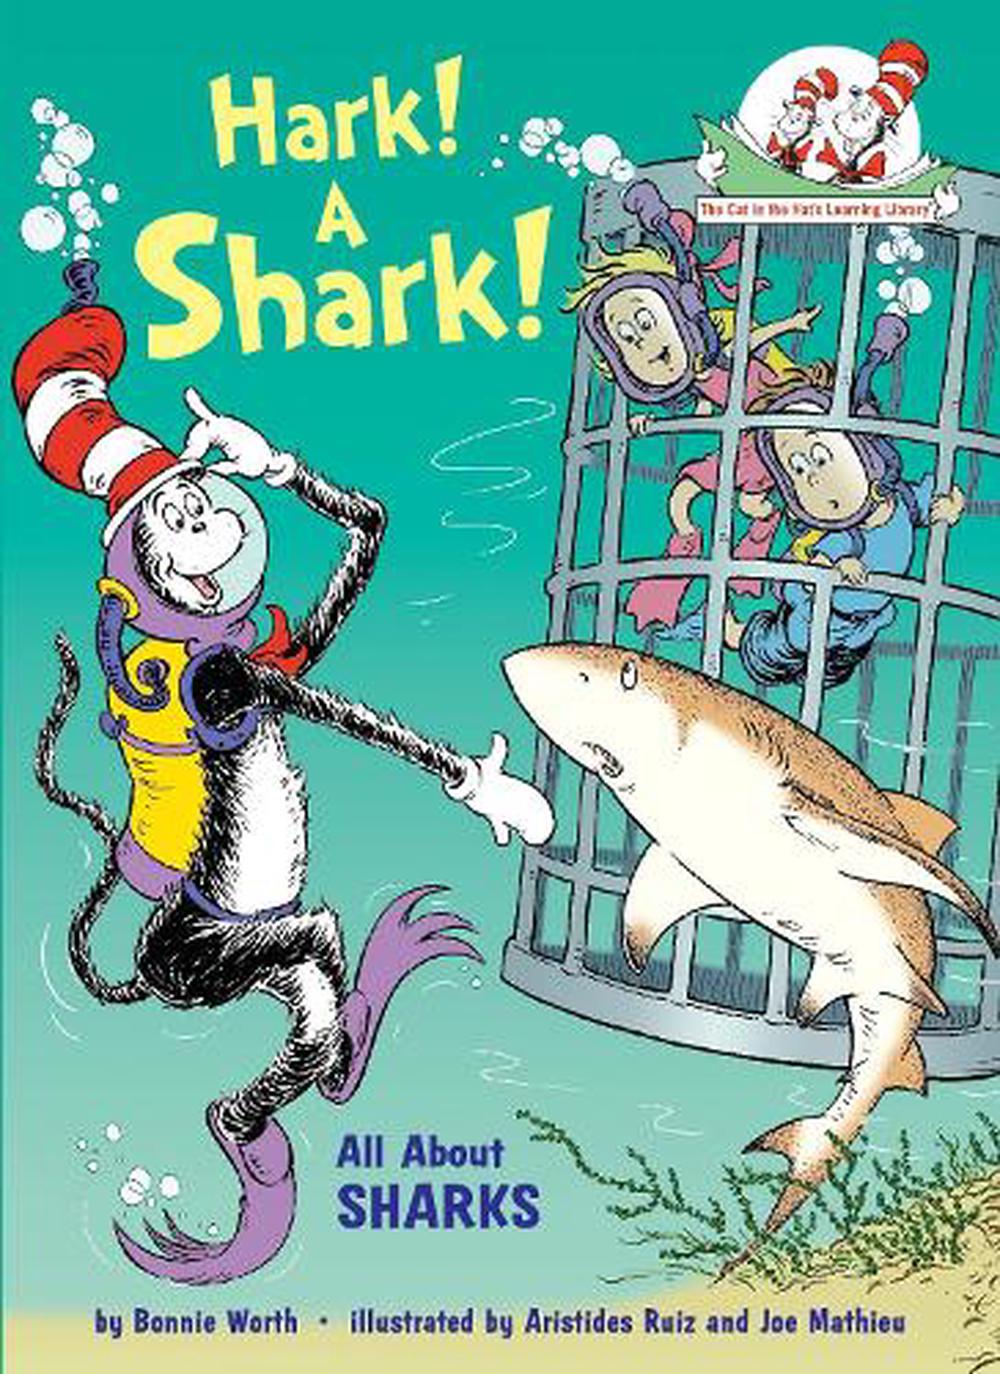 About　Hardcover,　Bonnie　All　online　Worth,　The　9780375870736　by　Nile　Shark!　Buy　Hark!　at　A　Sharks